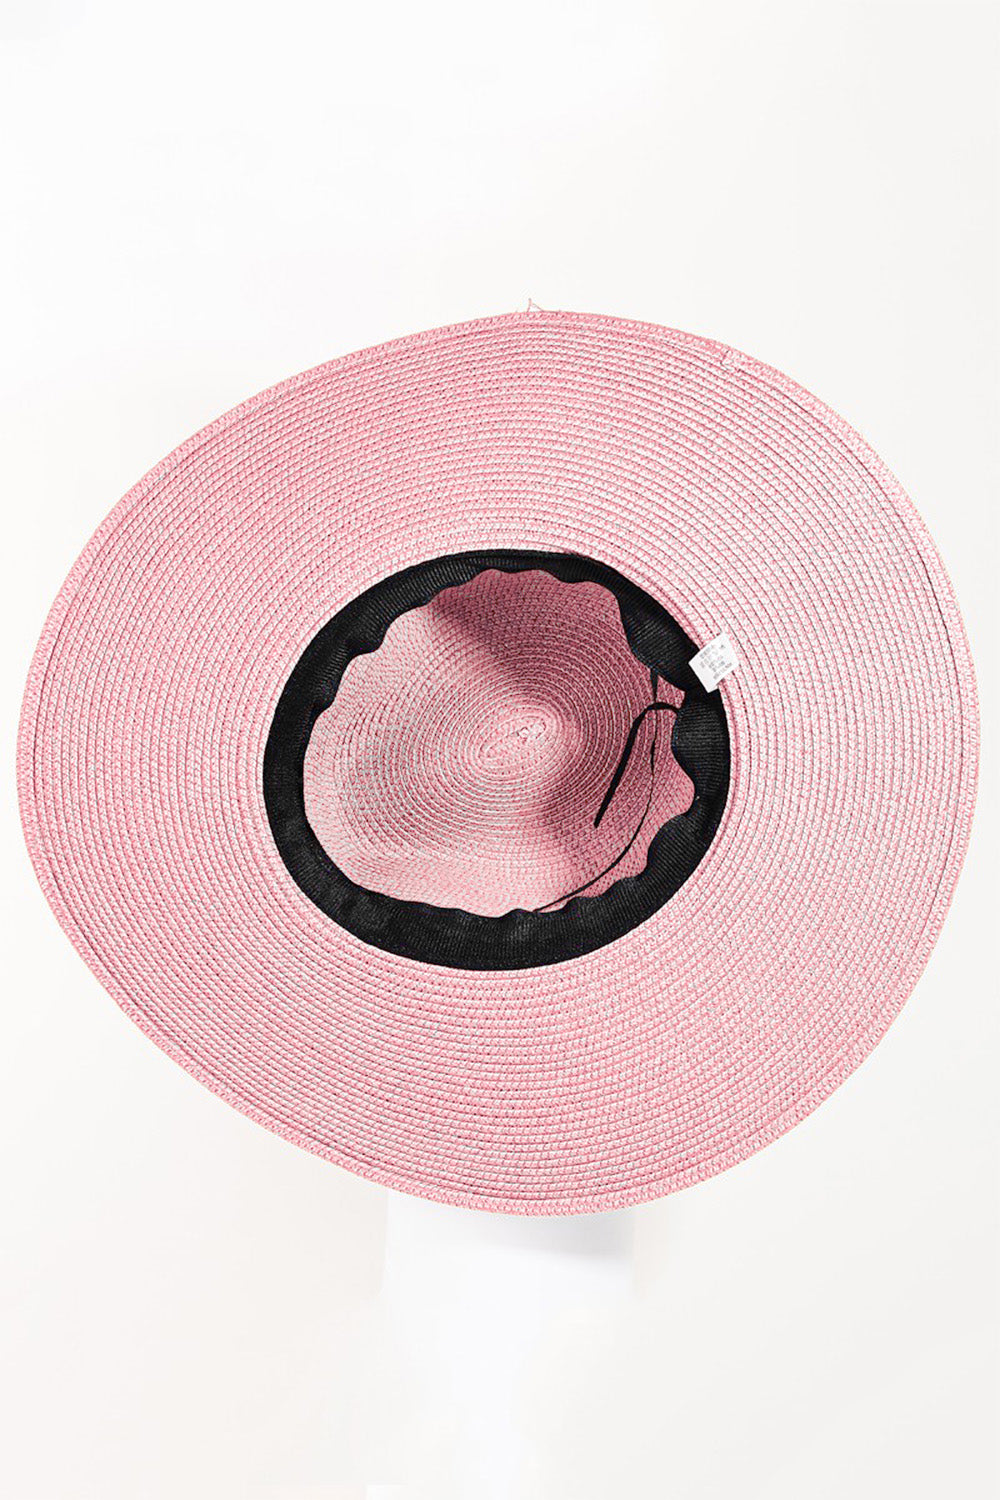 Pink Color Braided Rope Strap Fedora Hat